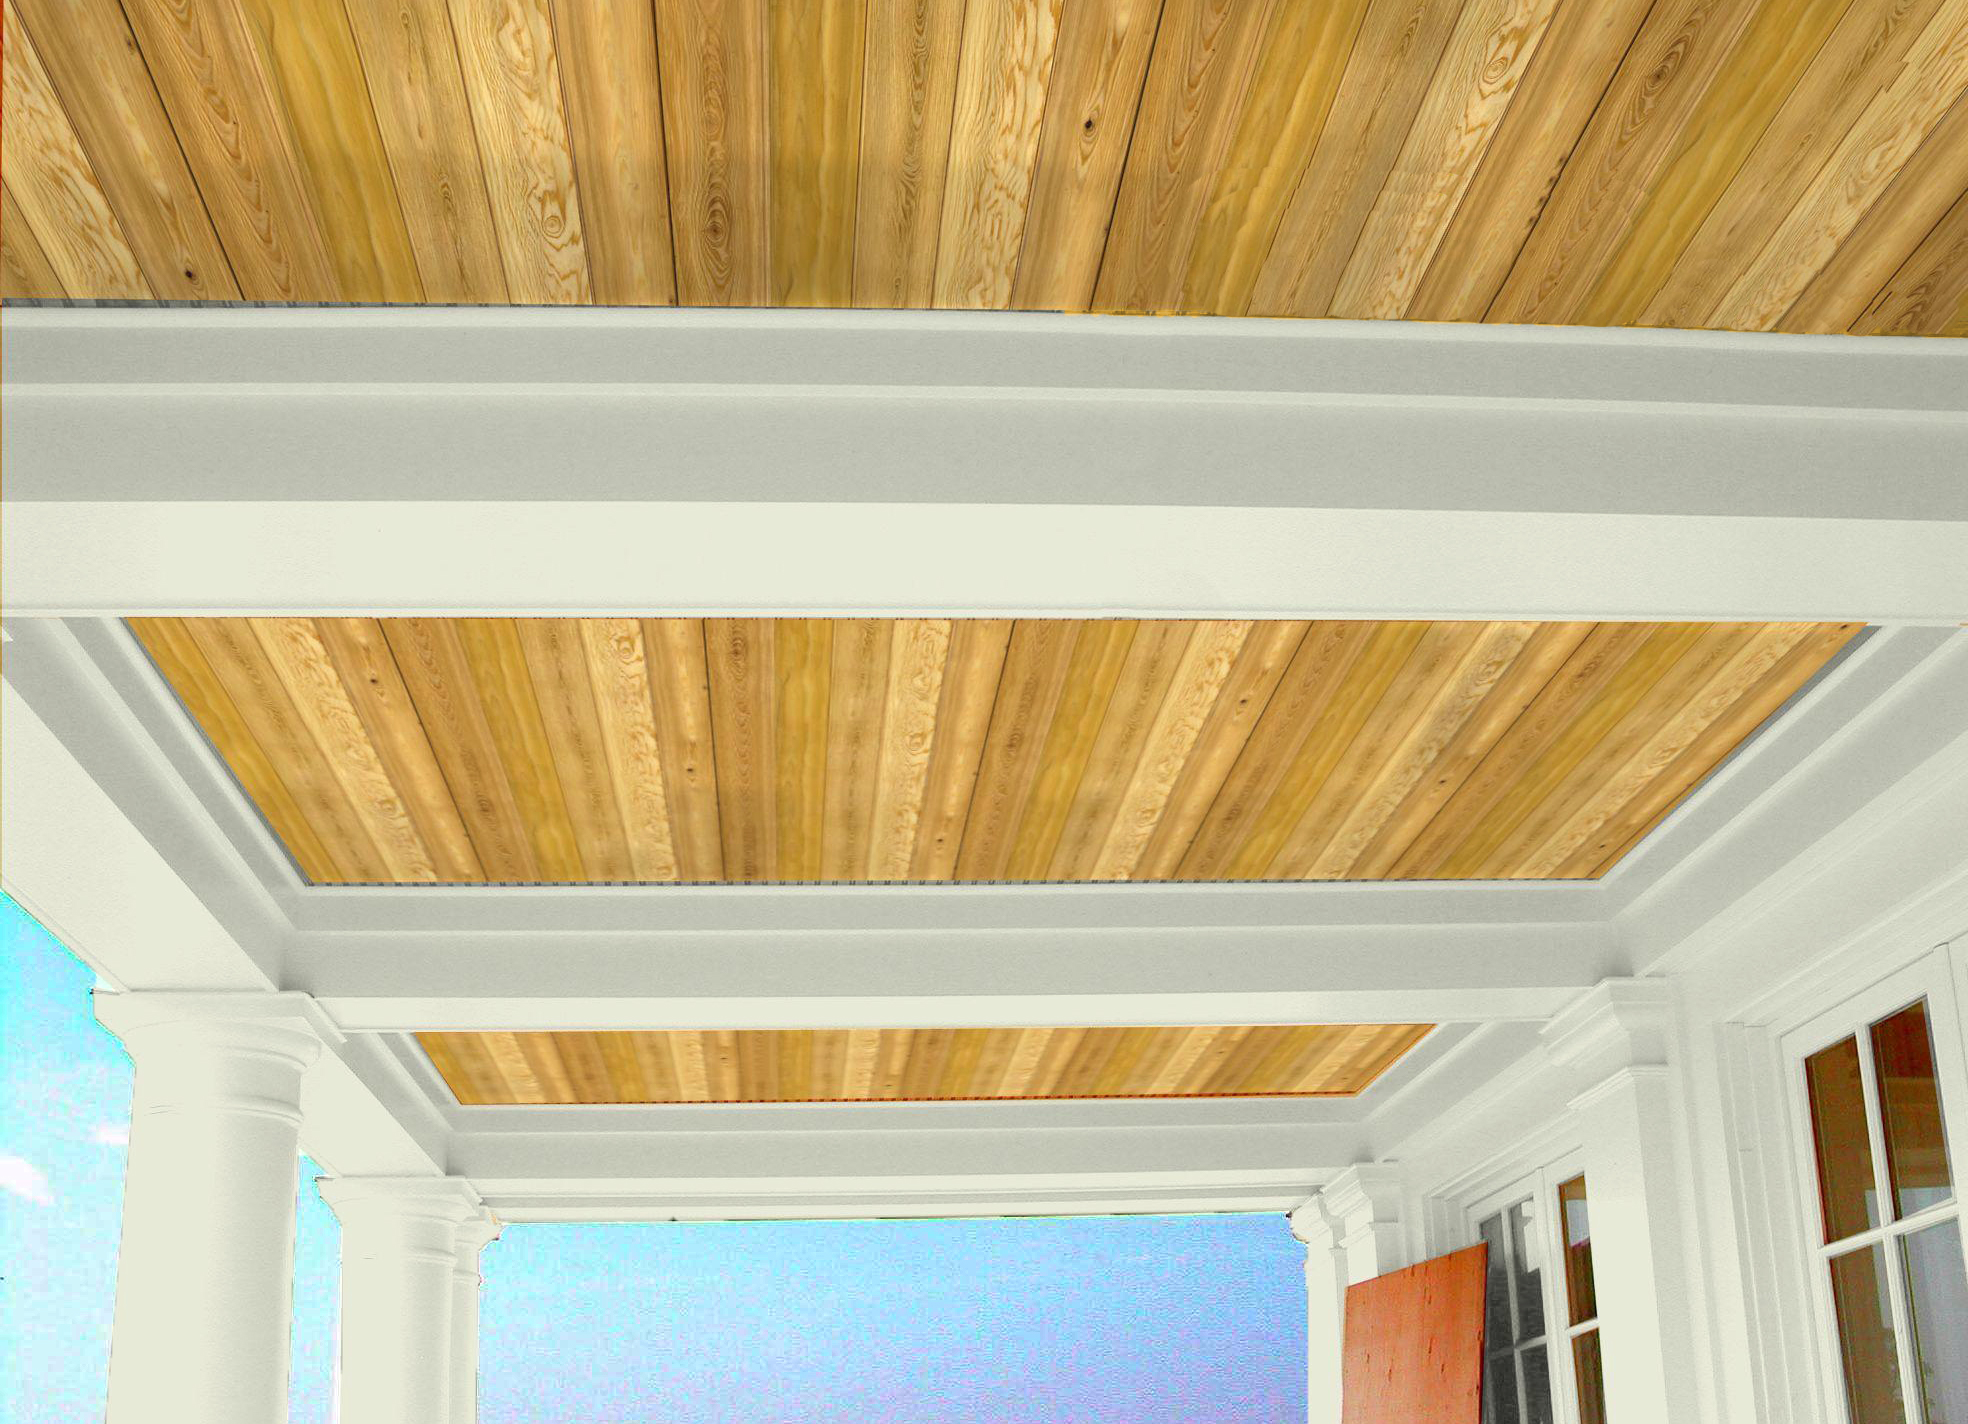 Cypress T&G porch roof